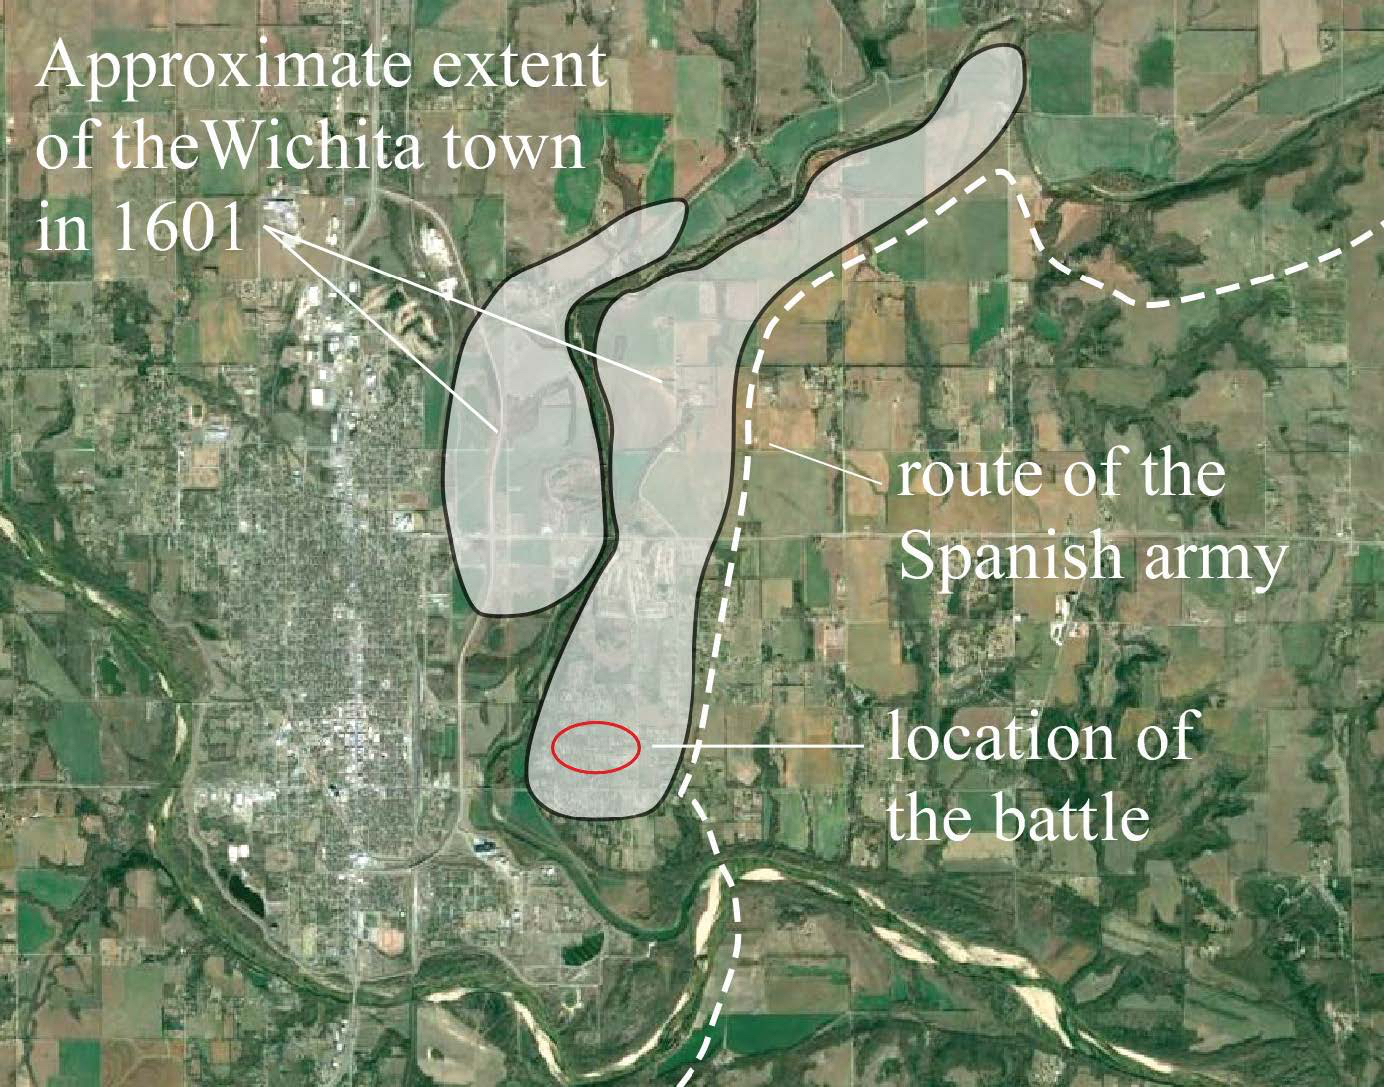 Photo: This map overlay outlines the likely area of Etzanoa. It also shows the route Spaniards are believed to have taken into the Wichita town and of a battle fought there in 1601.